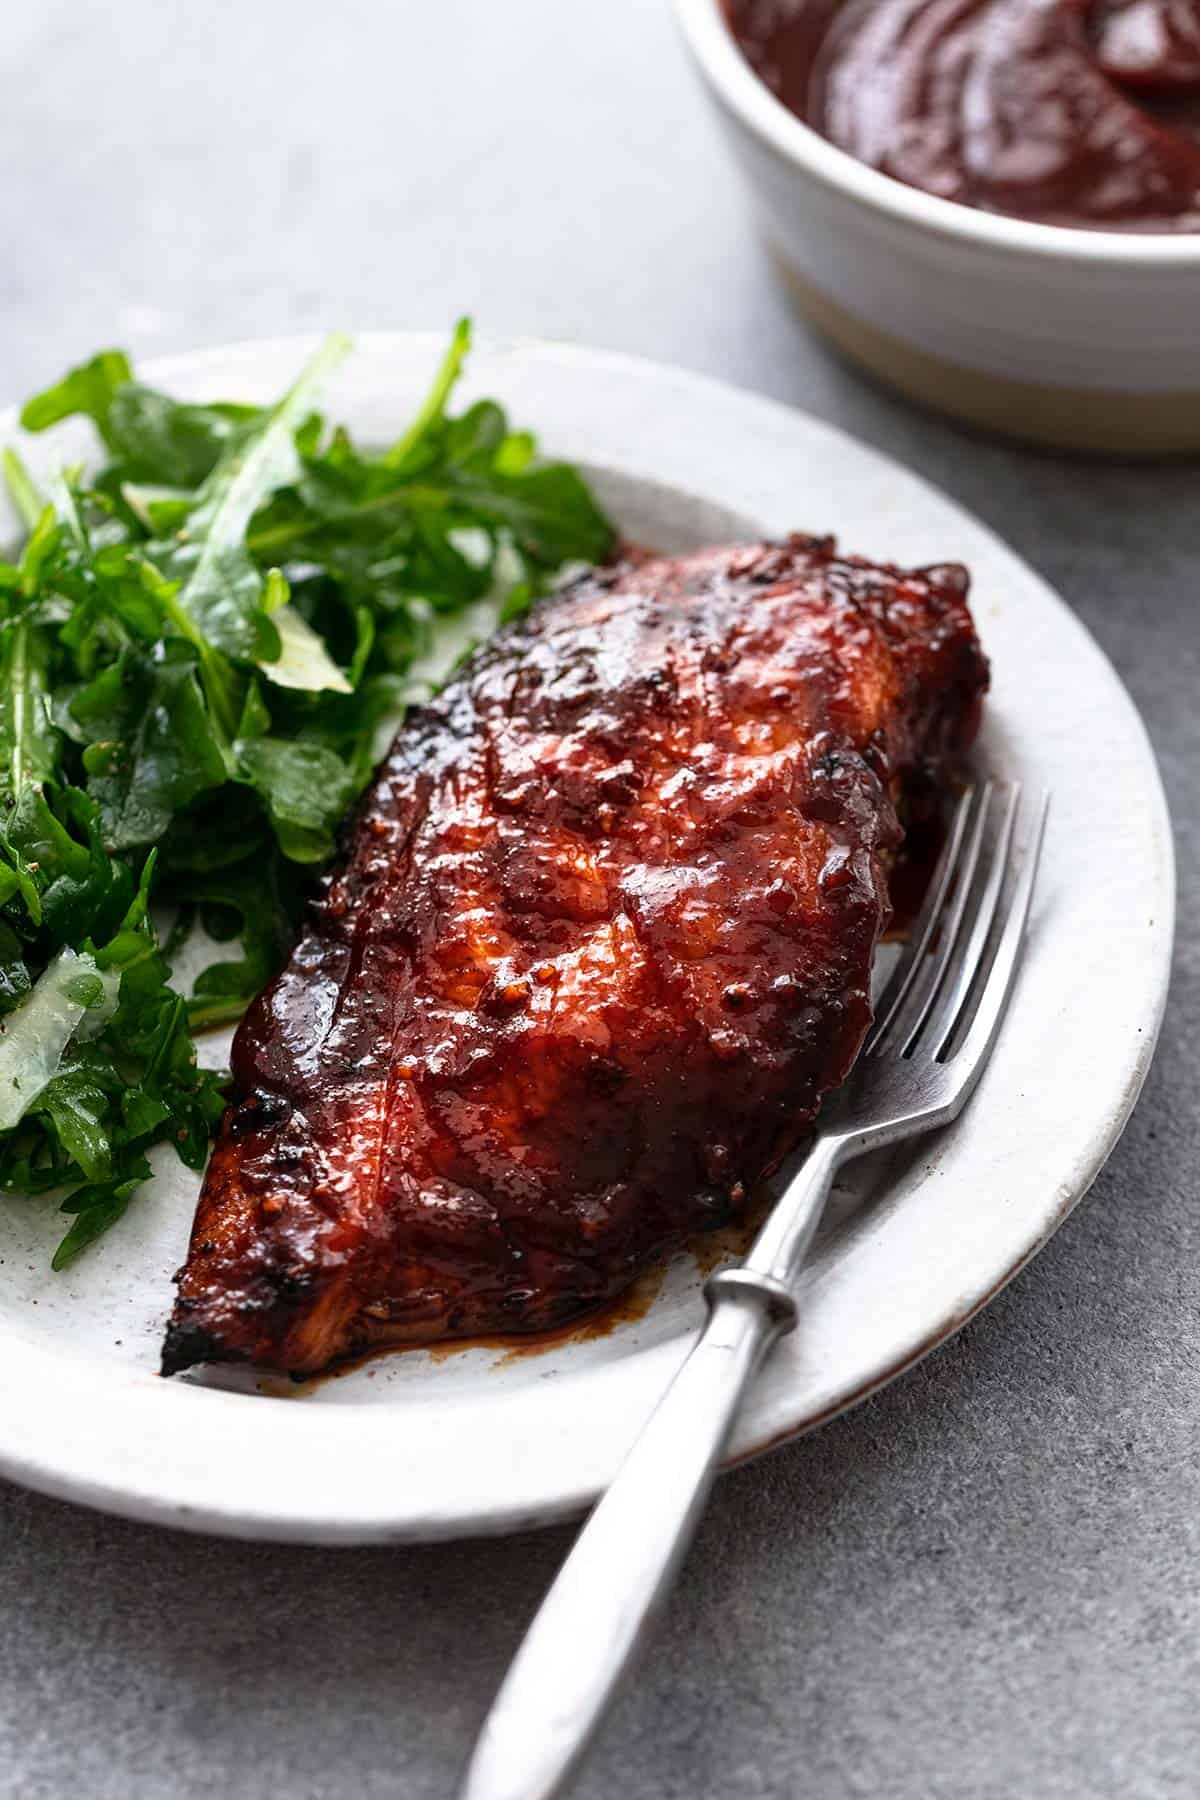 bbq chicken on plate with fork and greens